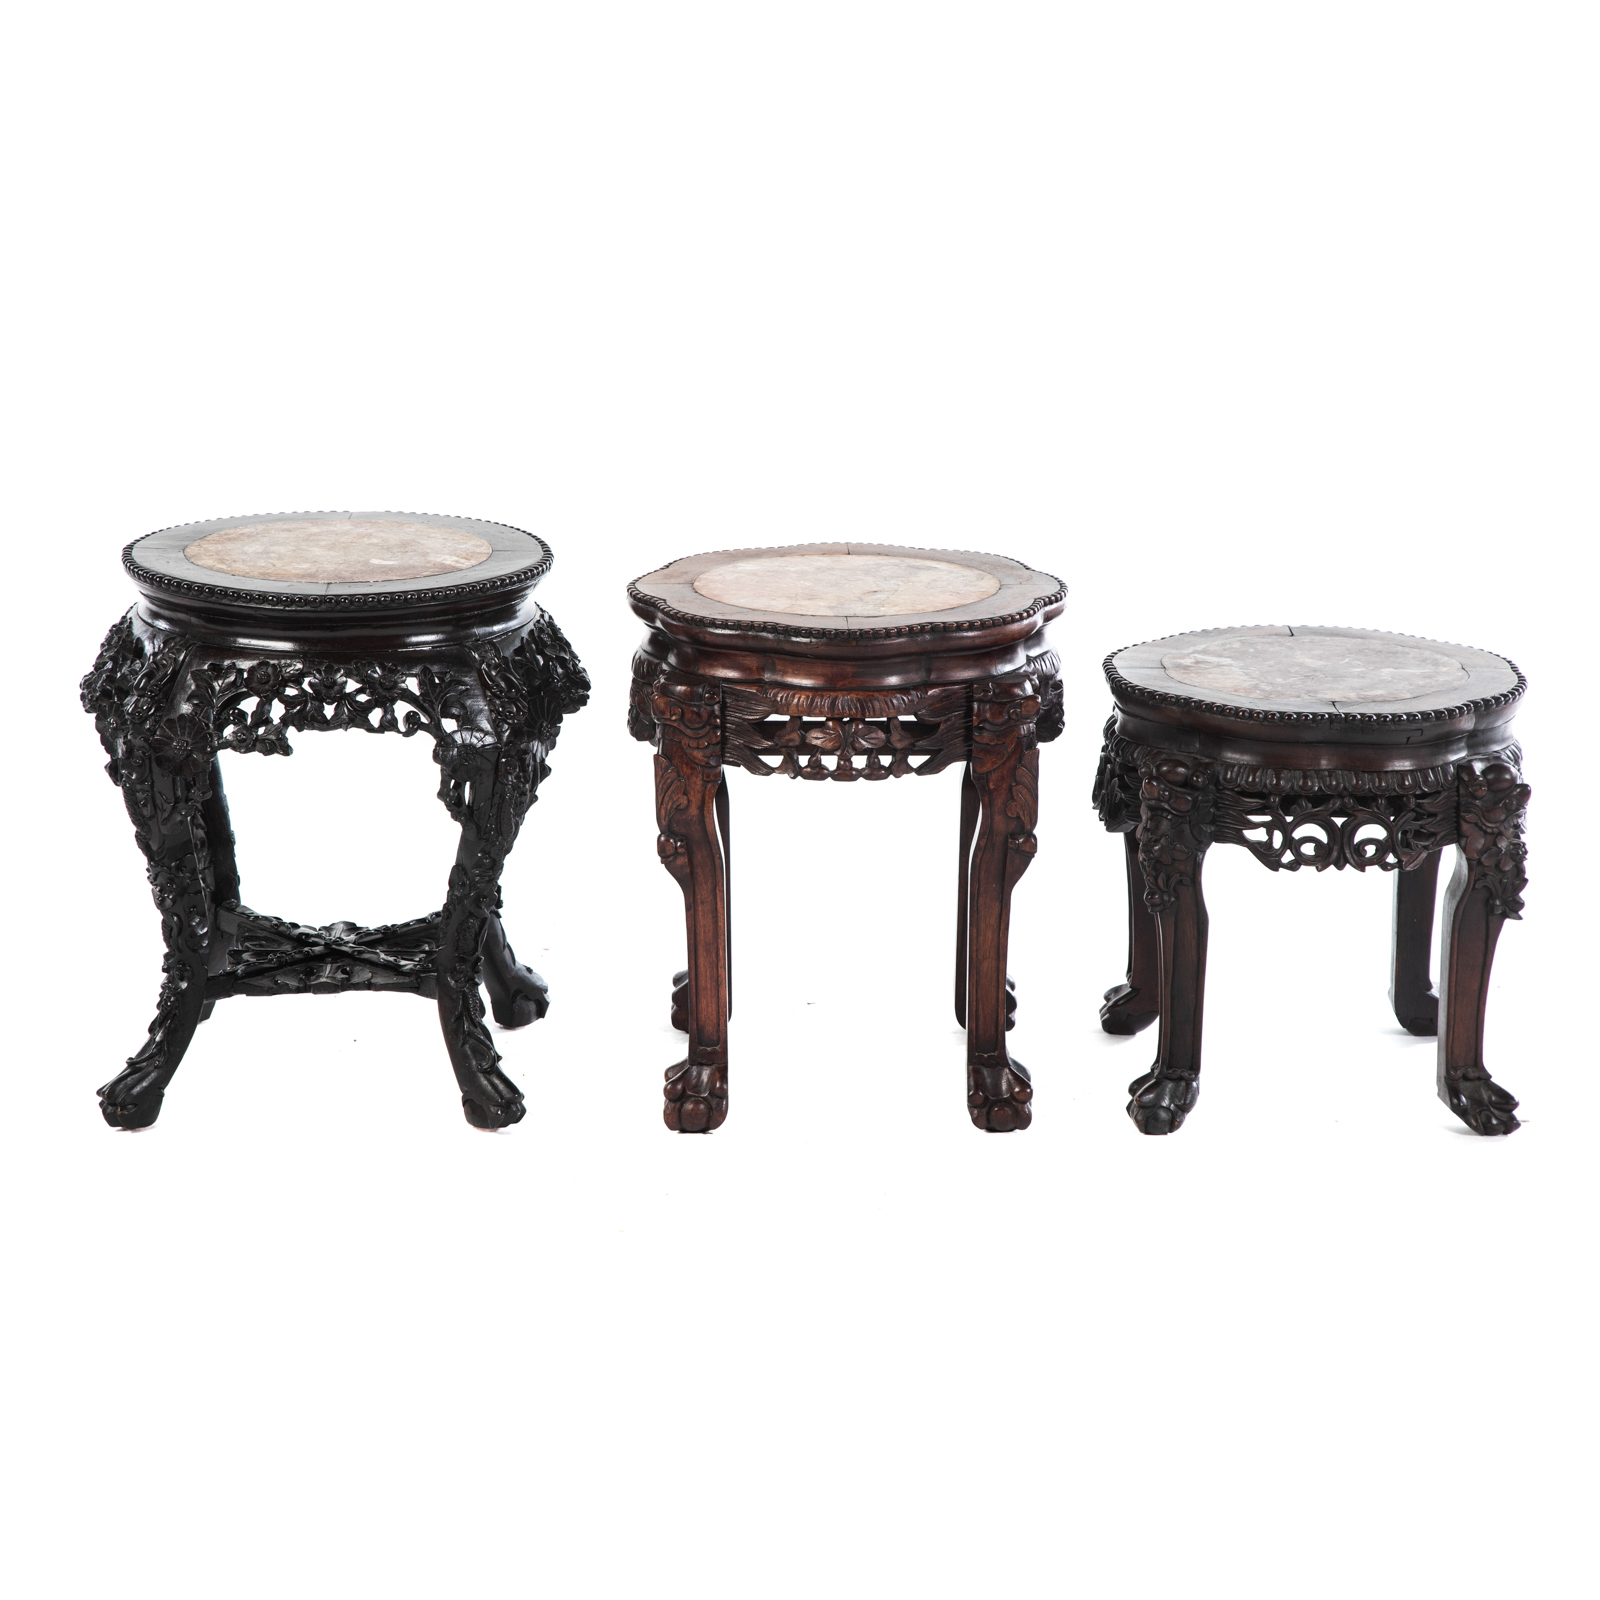 THREE CHINESE CARVED ROSEWOOD TABOURETS